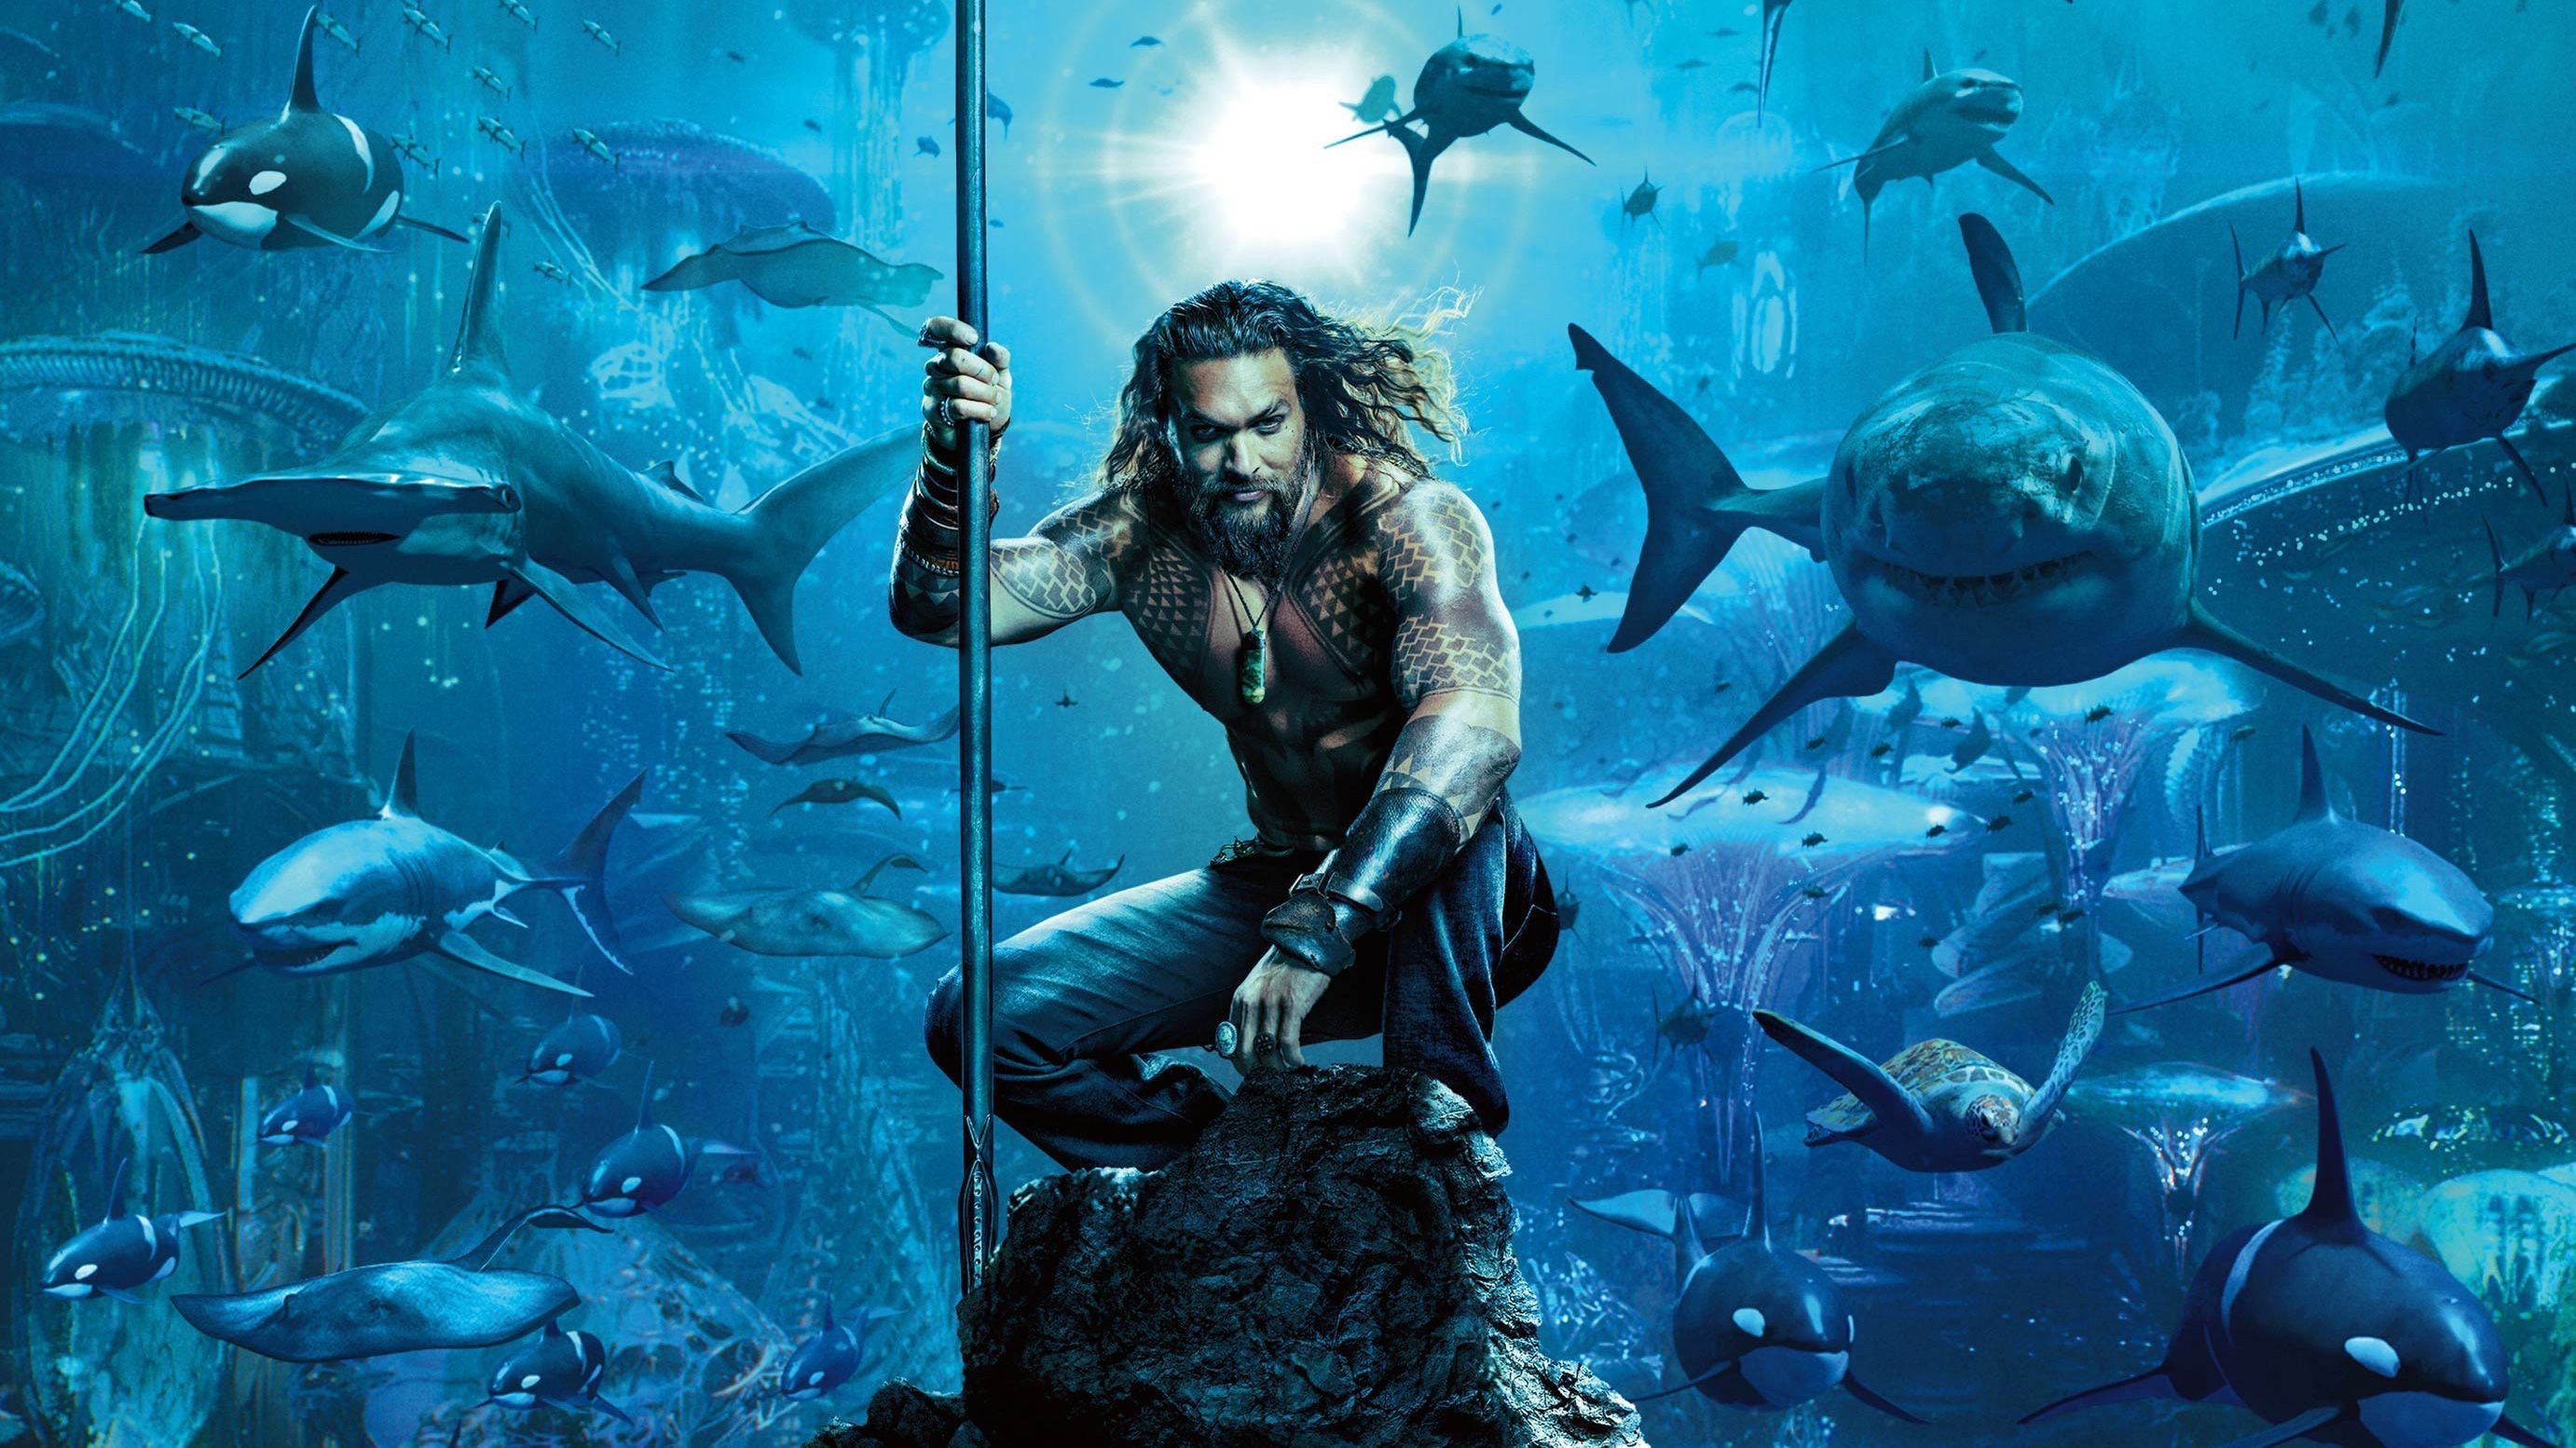 2764x1554 Aquaman Wallpapers iPhone, Android and Desktop